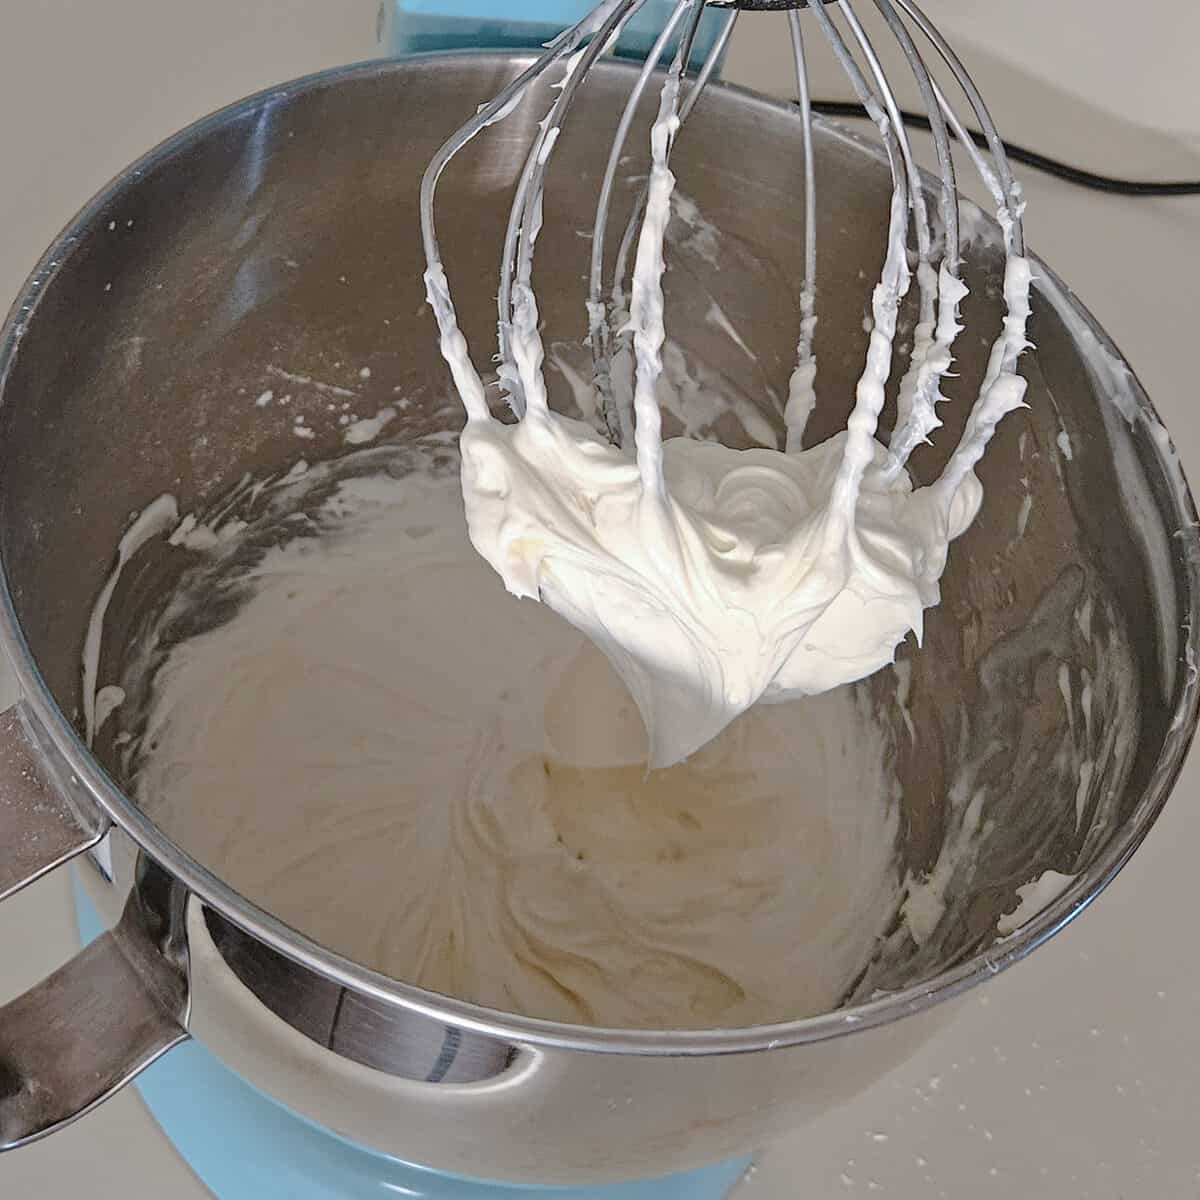 cream cheese icing in a stand mixer, clinging to the whip attachment showing finished fluffy texture.